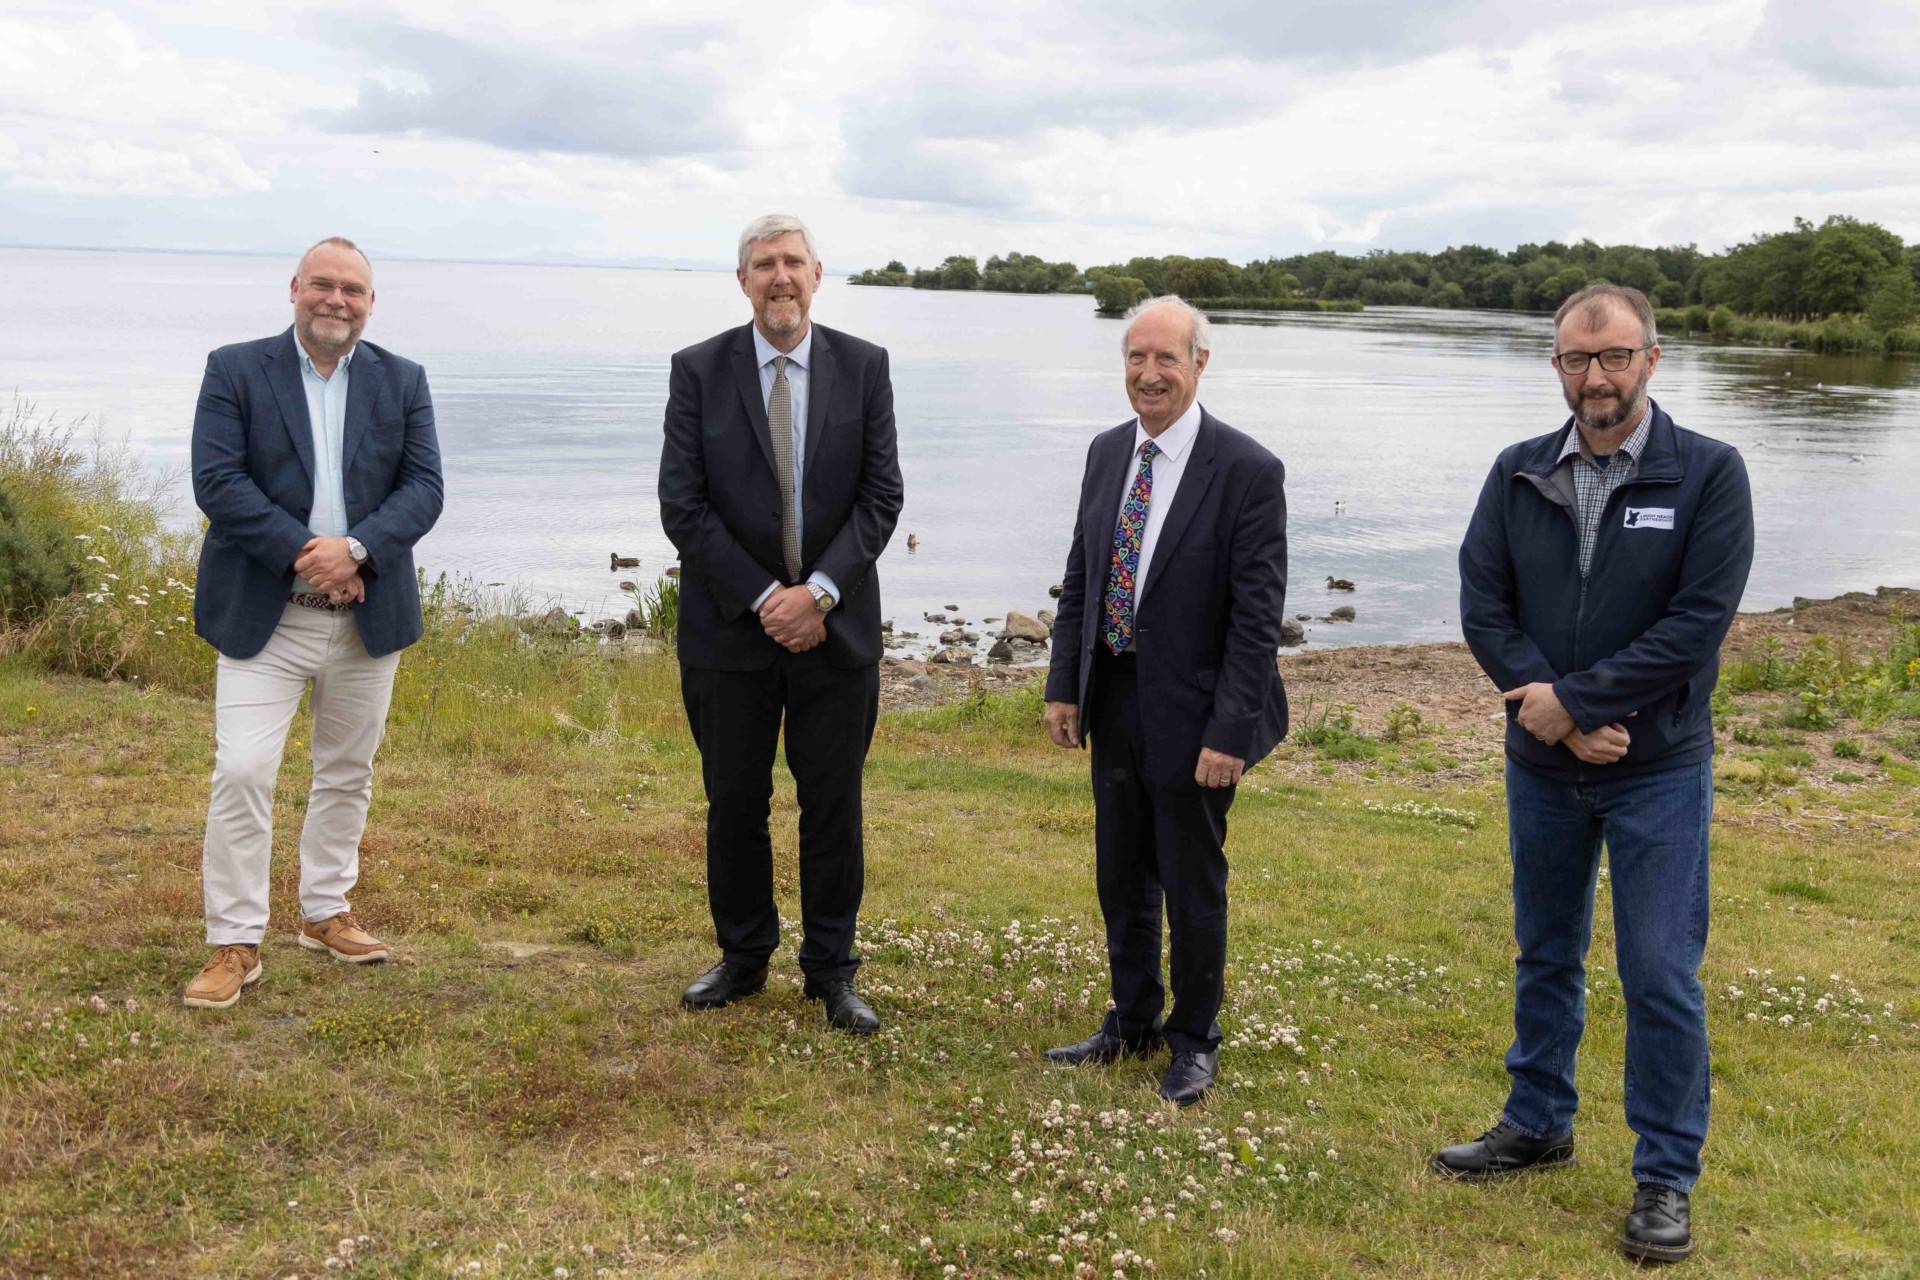 Minister makes commitment after meeting with Lough Neagh Partnership